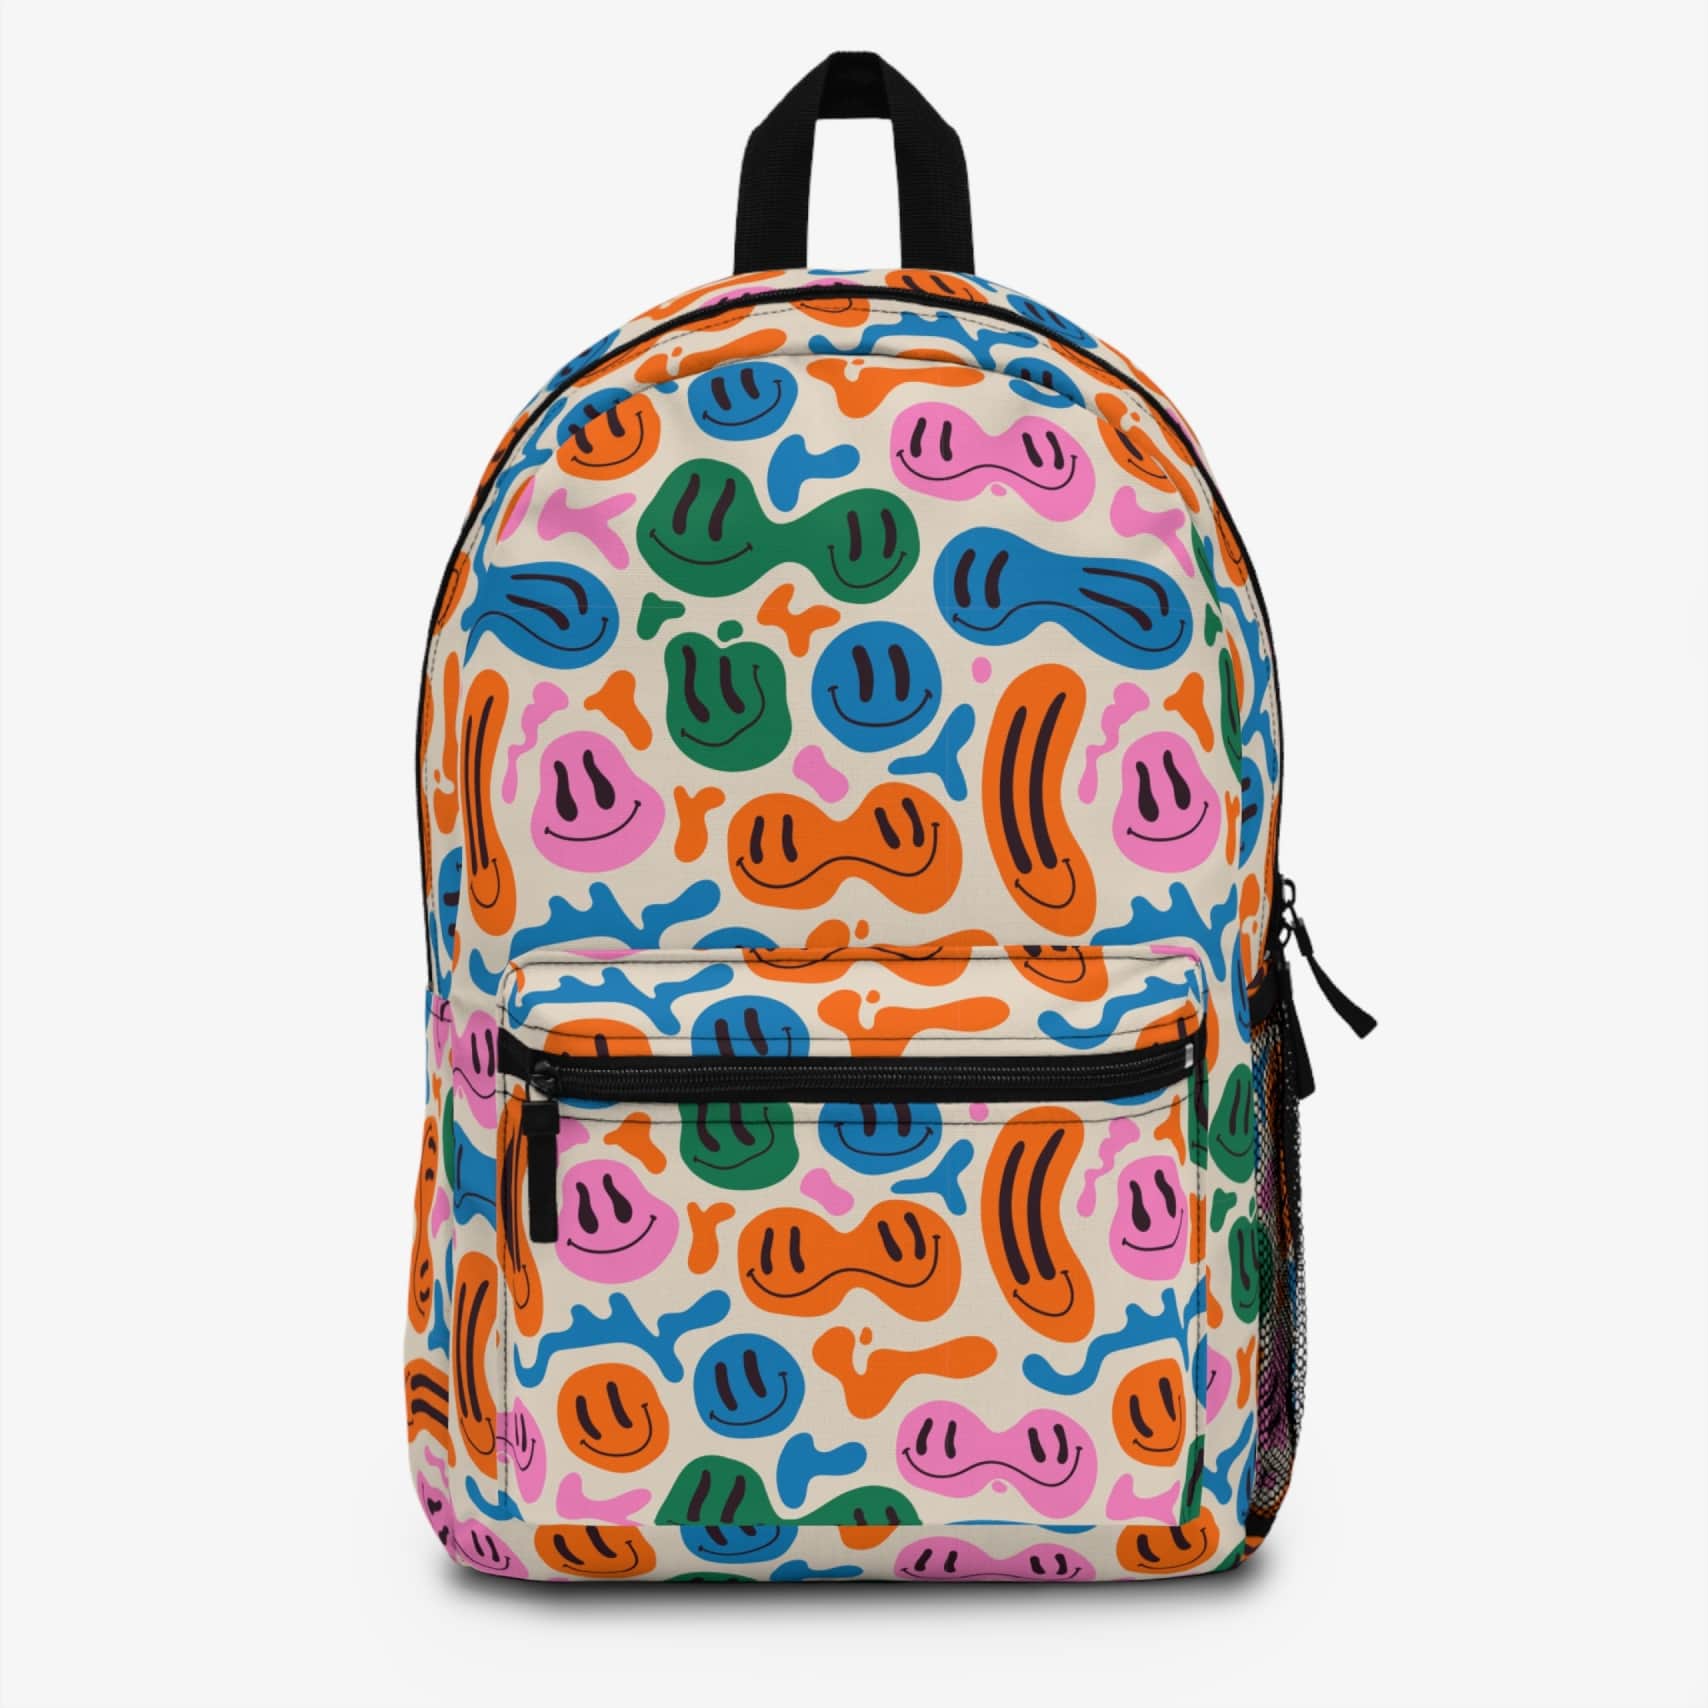 Abstract smiley face art backpack.